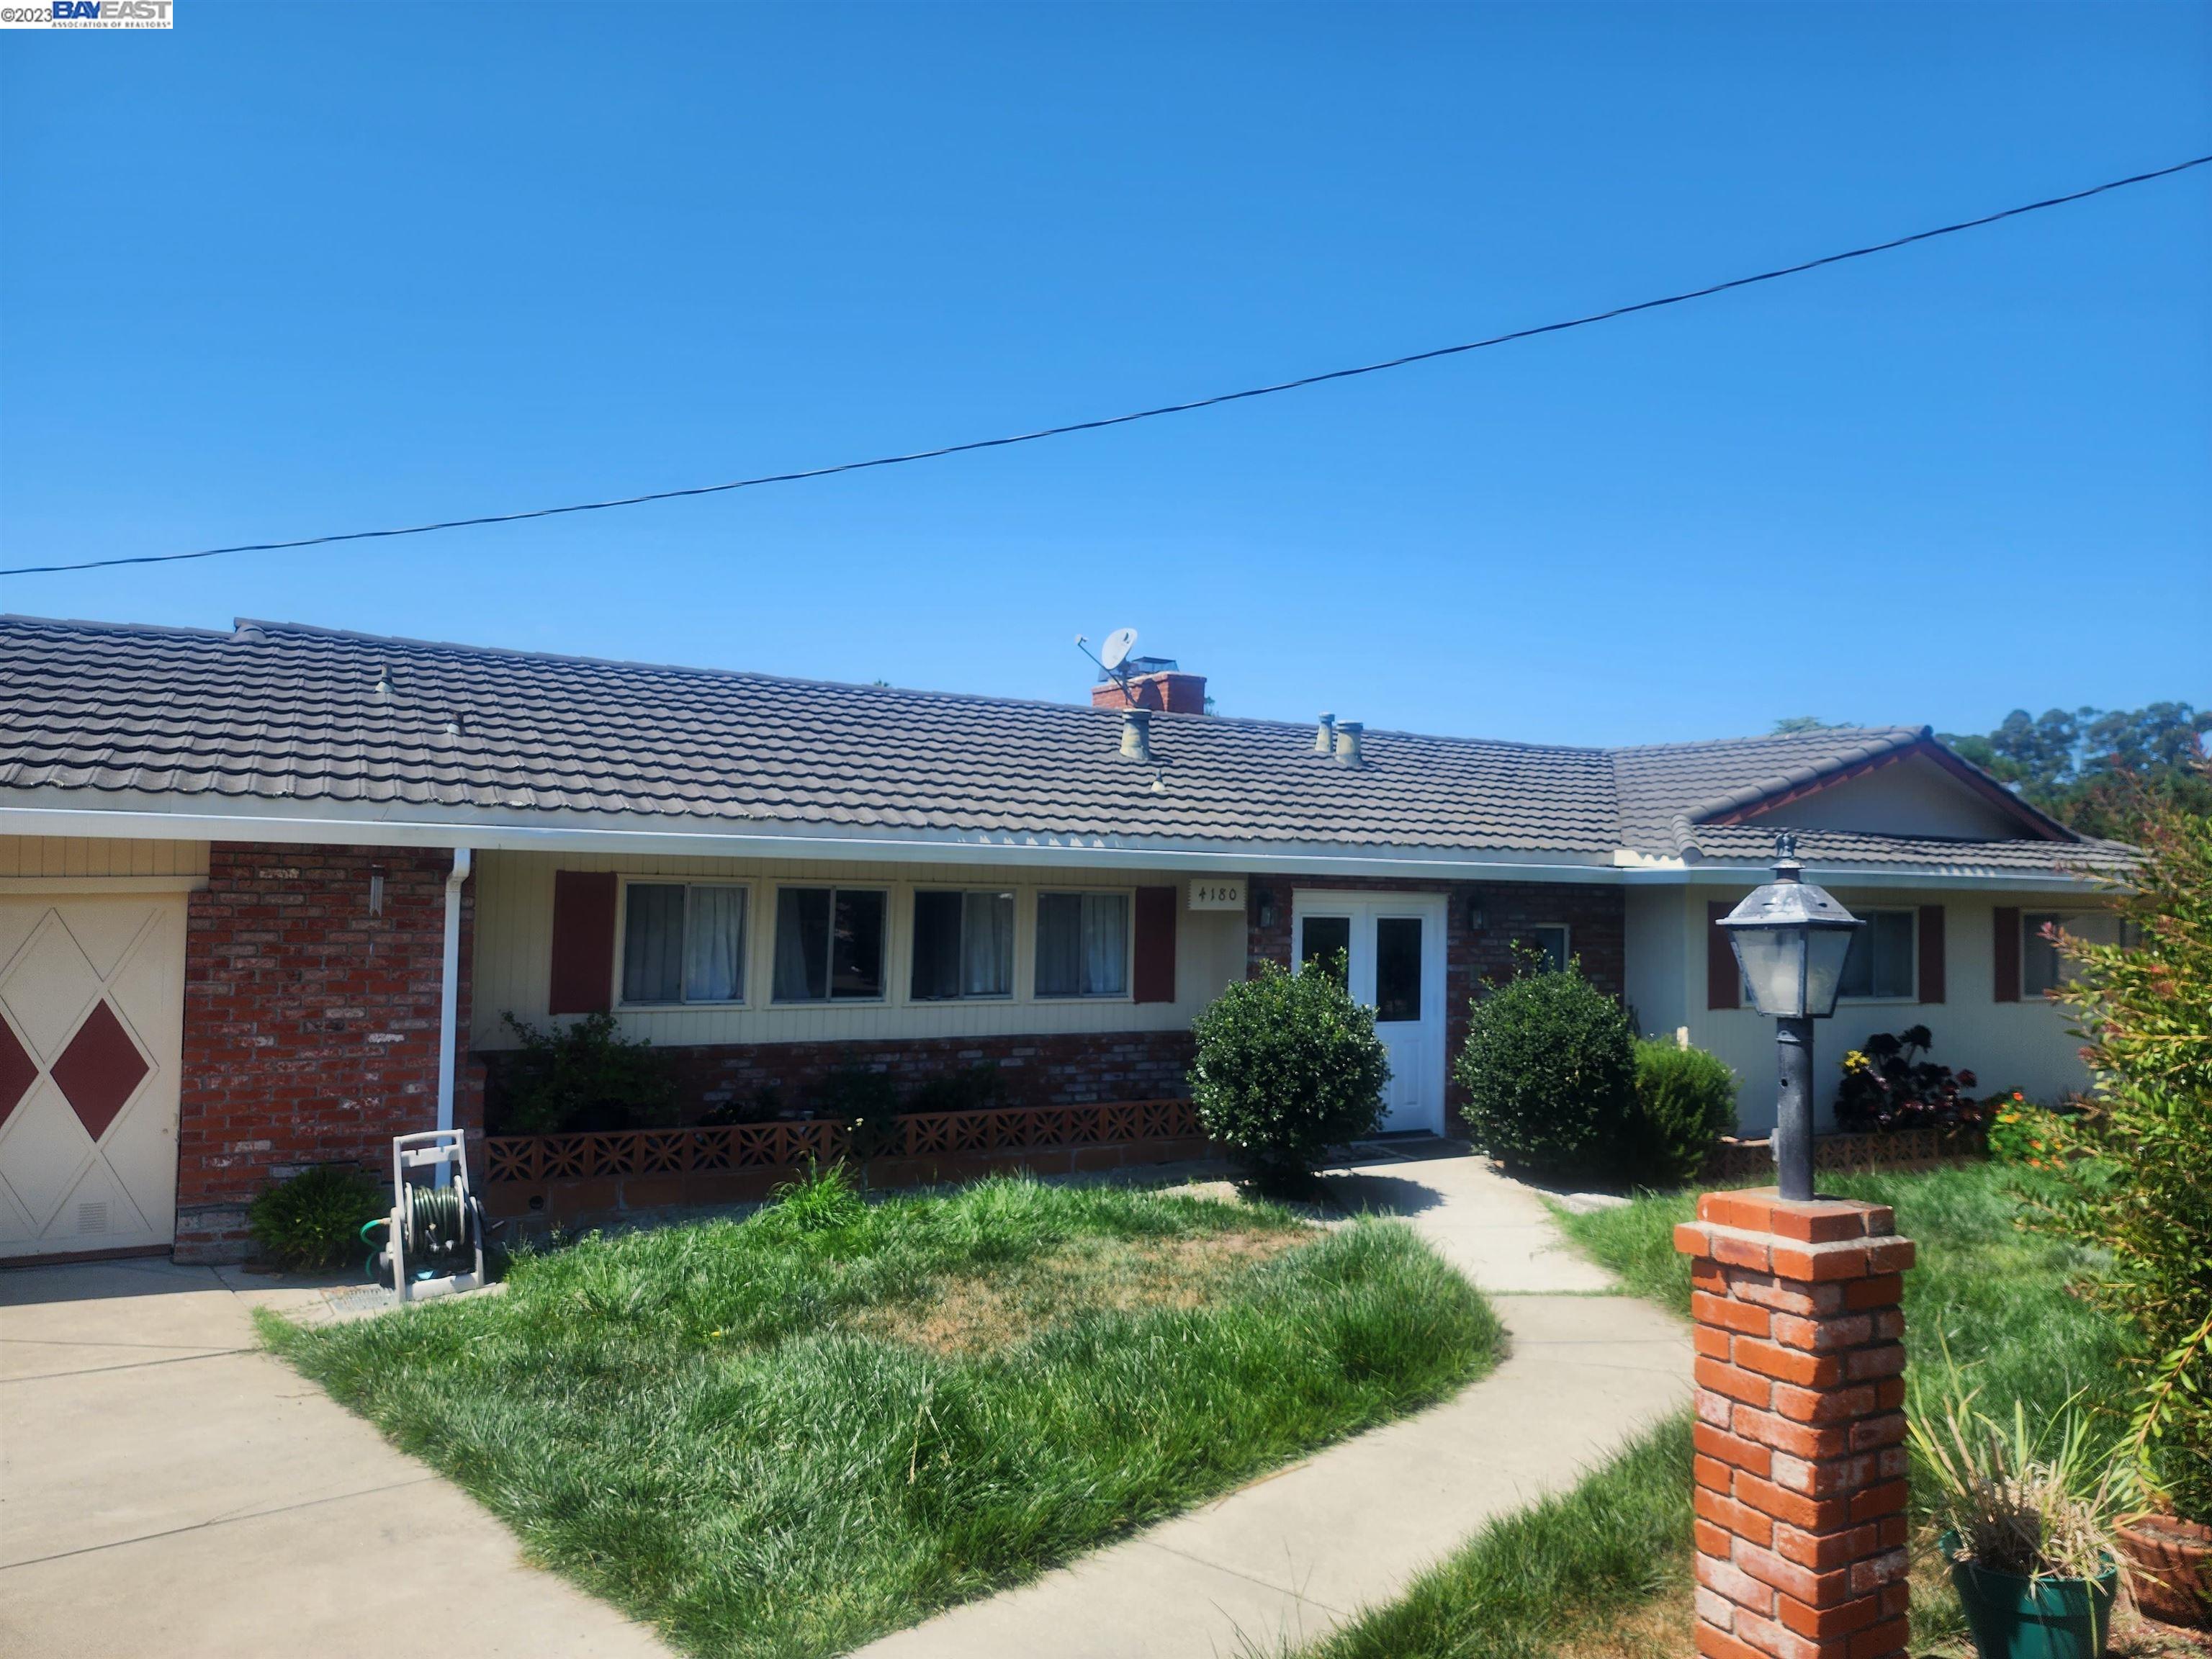 Come take a look at this beautifully maintained Ranch style home in the sought out Chabot Park neighborhood in the Oakland Hills. This home has been in the same family since it was built in 1965. This light-filled 2480 sq ft home sits on a huge 13,000 sq ft lot. The backyard is a gardener's dream. Some recent updates include newer decks, foundation, fencing, and security cameras. This 3-story home boasts of a lot of original features as well such as 2 fireplaces, a den with a bar fit for entertainment, and an additional game room. This home is a must see.